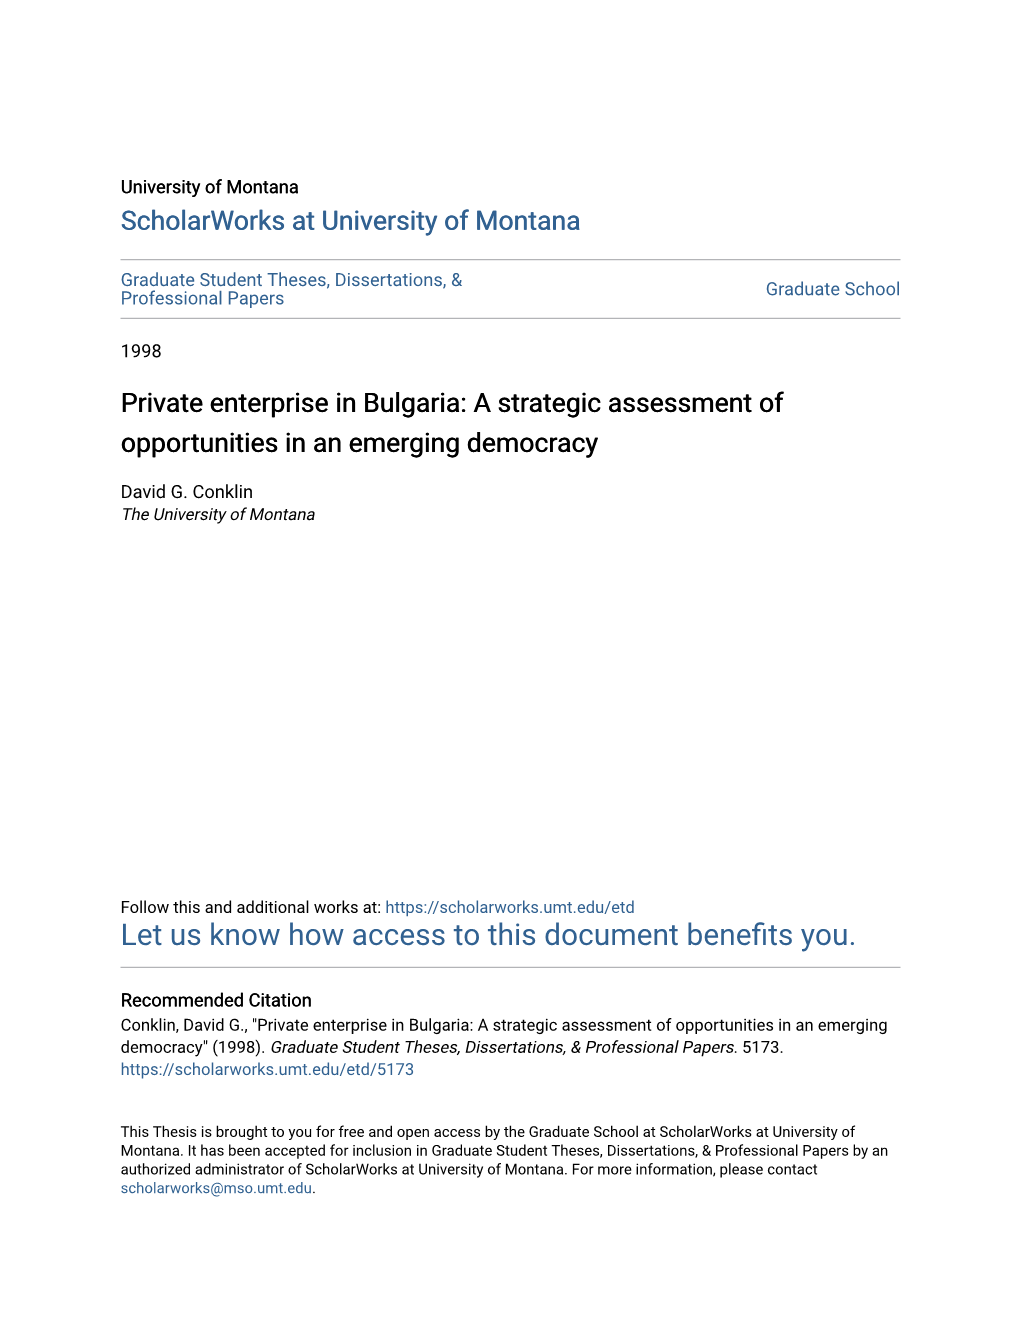 Private Enterprise in Bulgaria: a Strategic Assessment of Opportunities in an Emerging Democracy